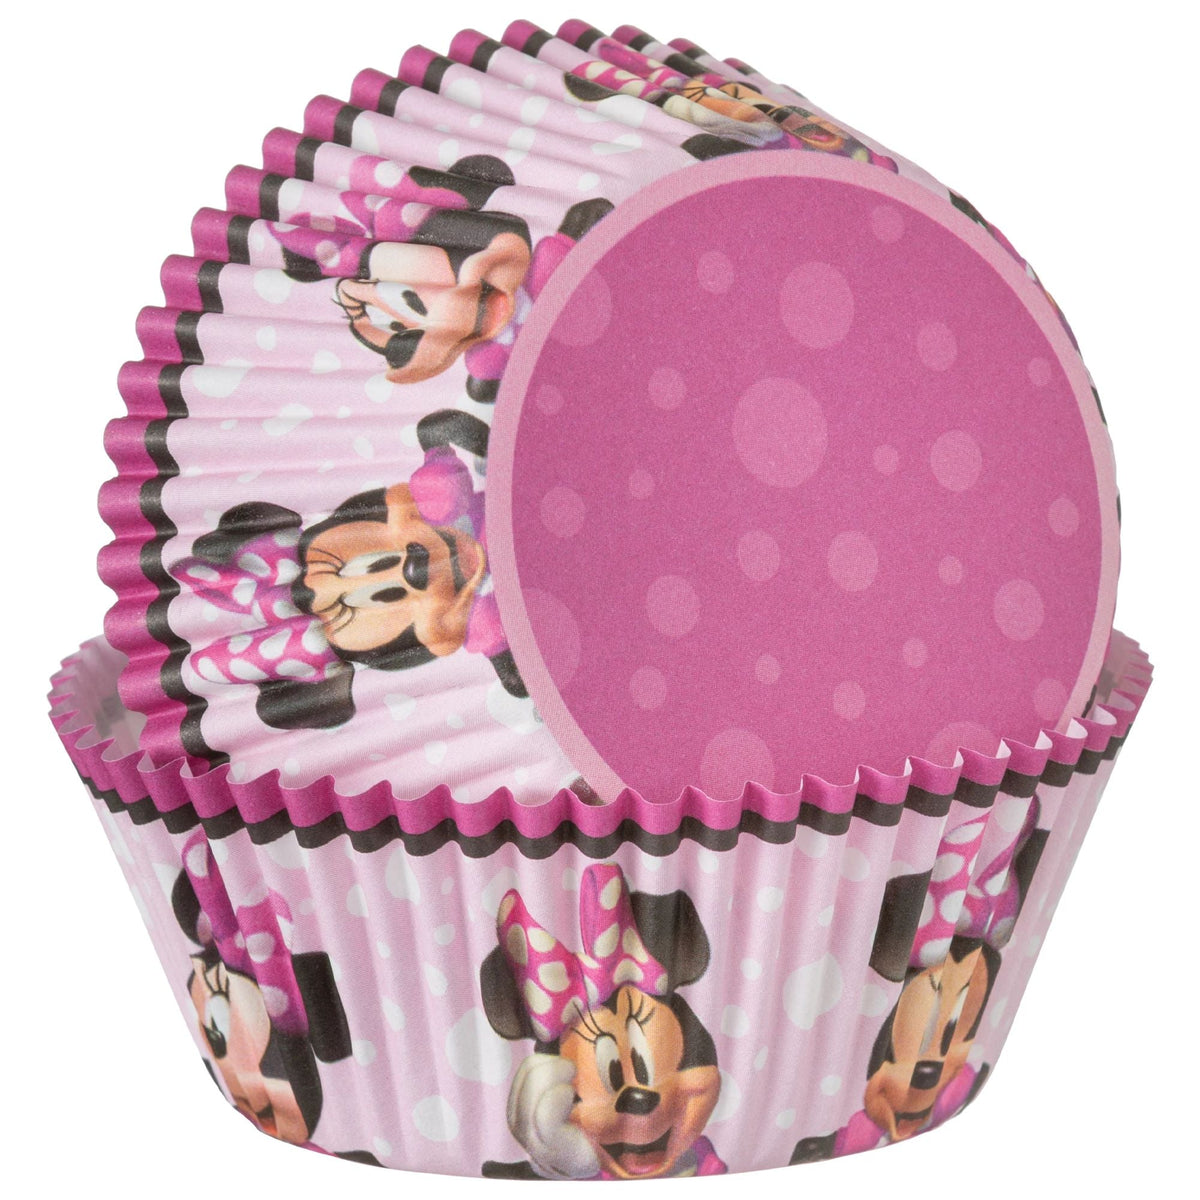 AMSCAN CA Cake Supplies Minnie Mouse Forever Birthday Baking Cups, 48 Count 192937424414